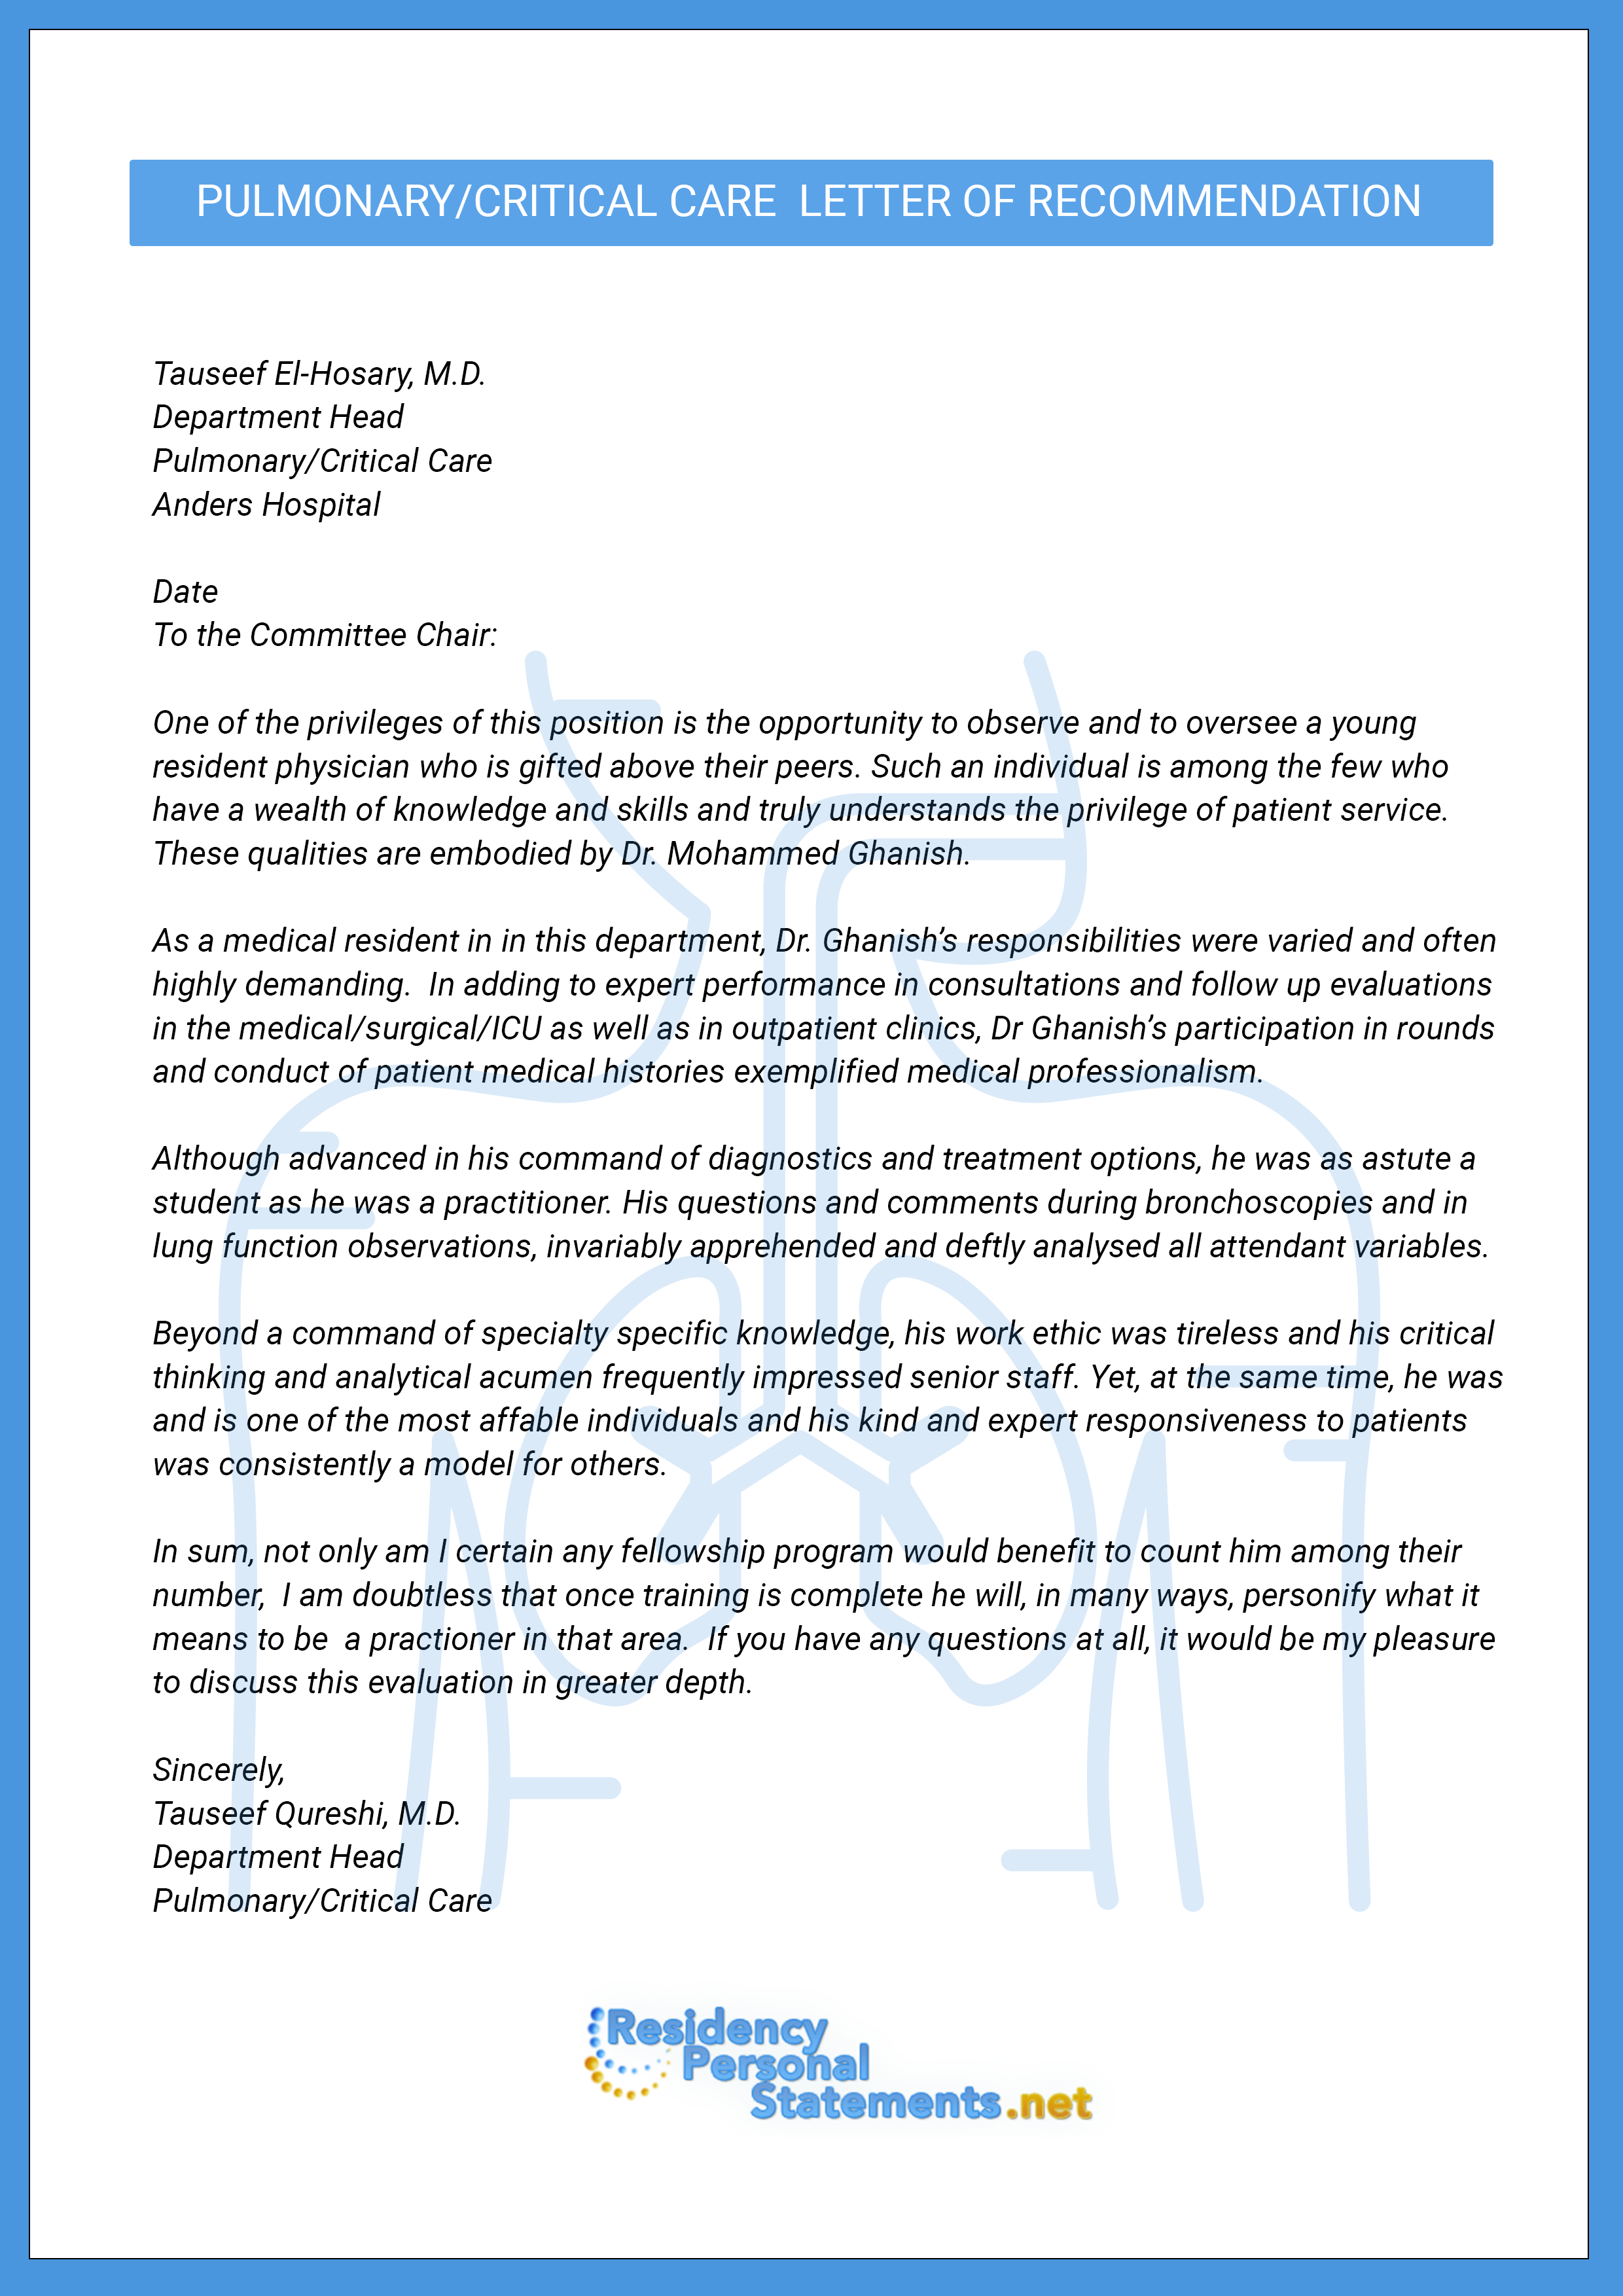 Sample Letter Of Recommendation For Director Position from residencypersonalstatements.net